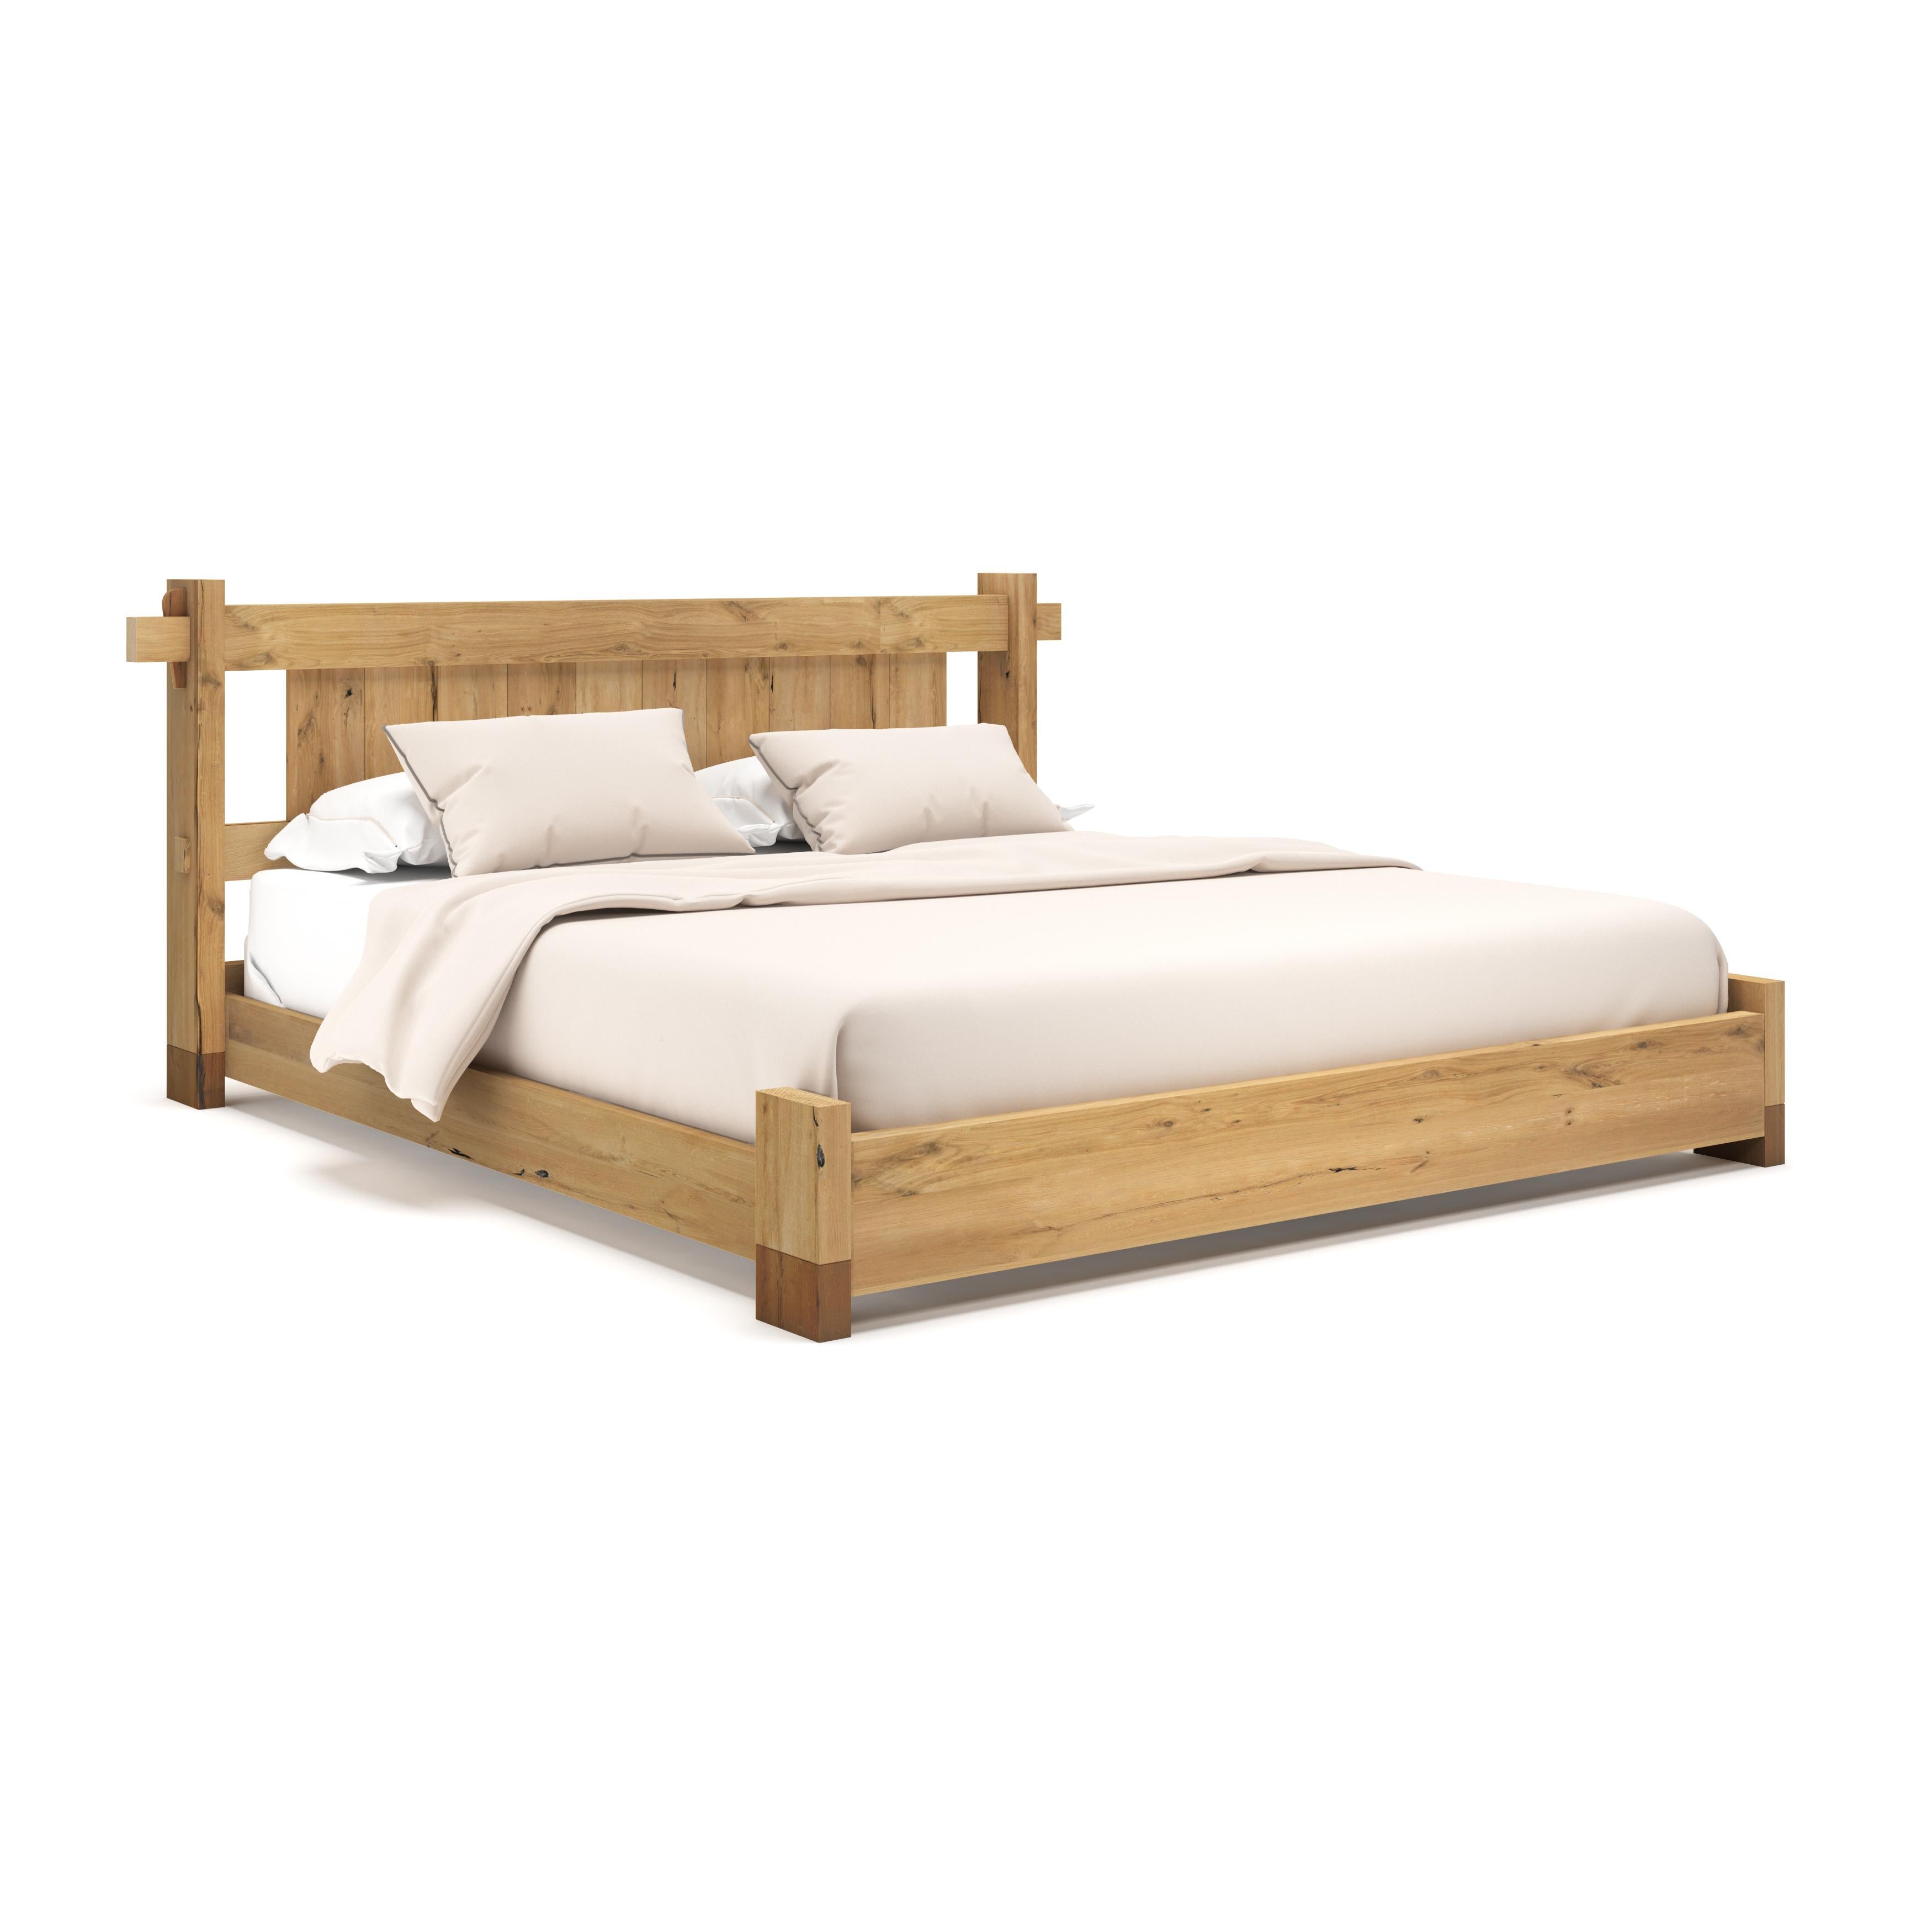 Country Dala V-Bed For Sale